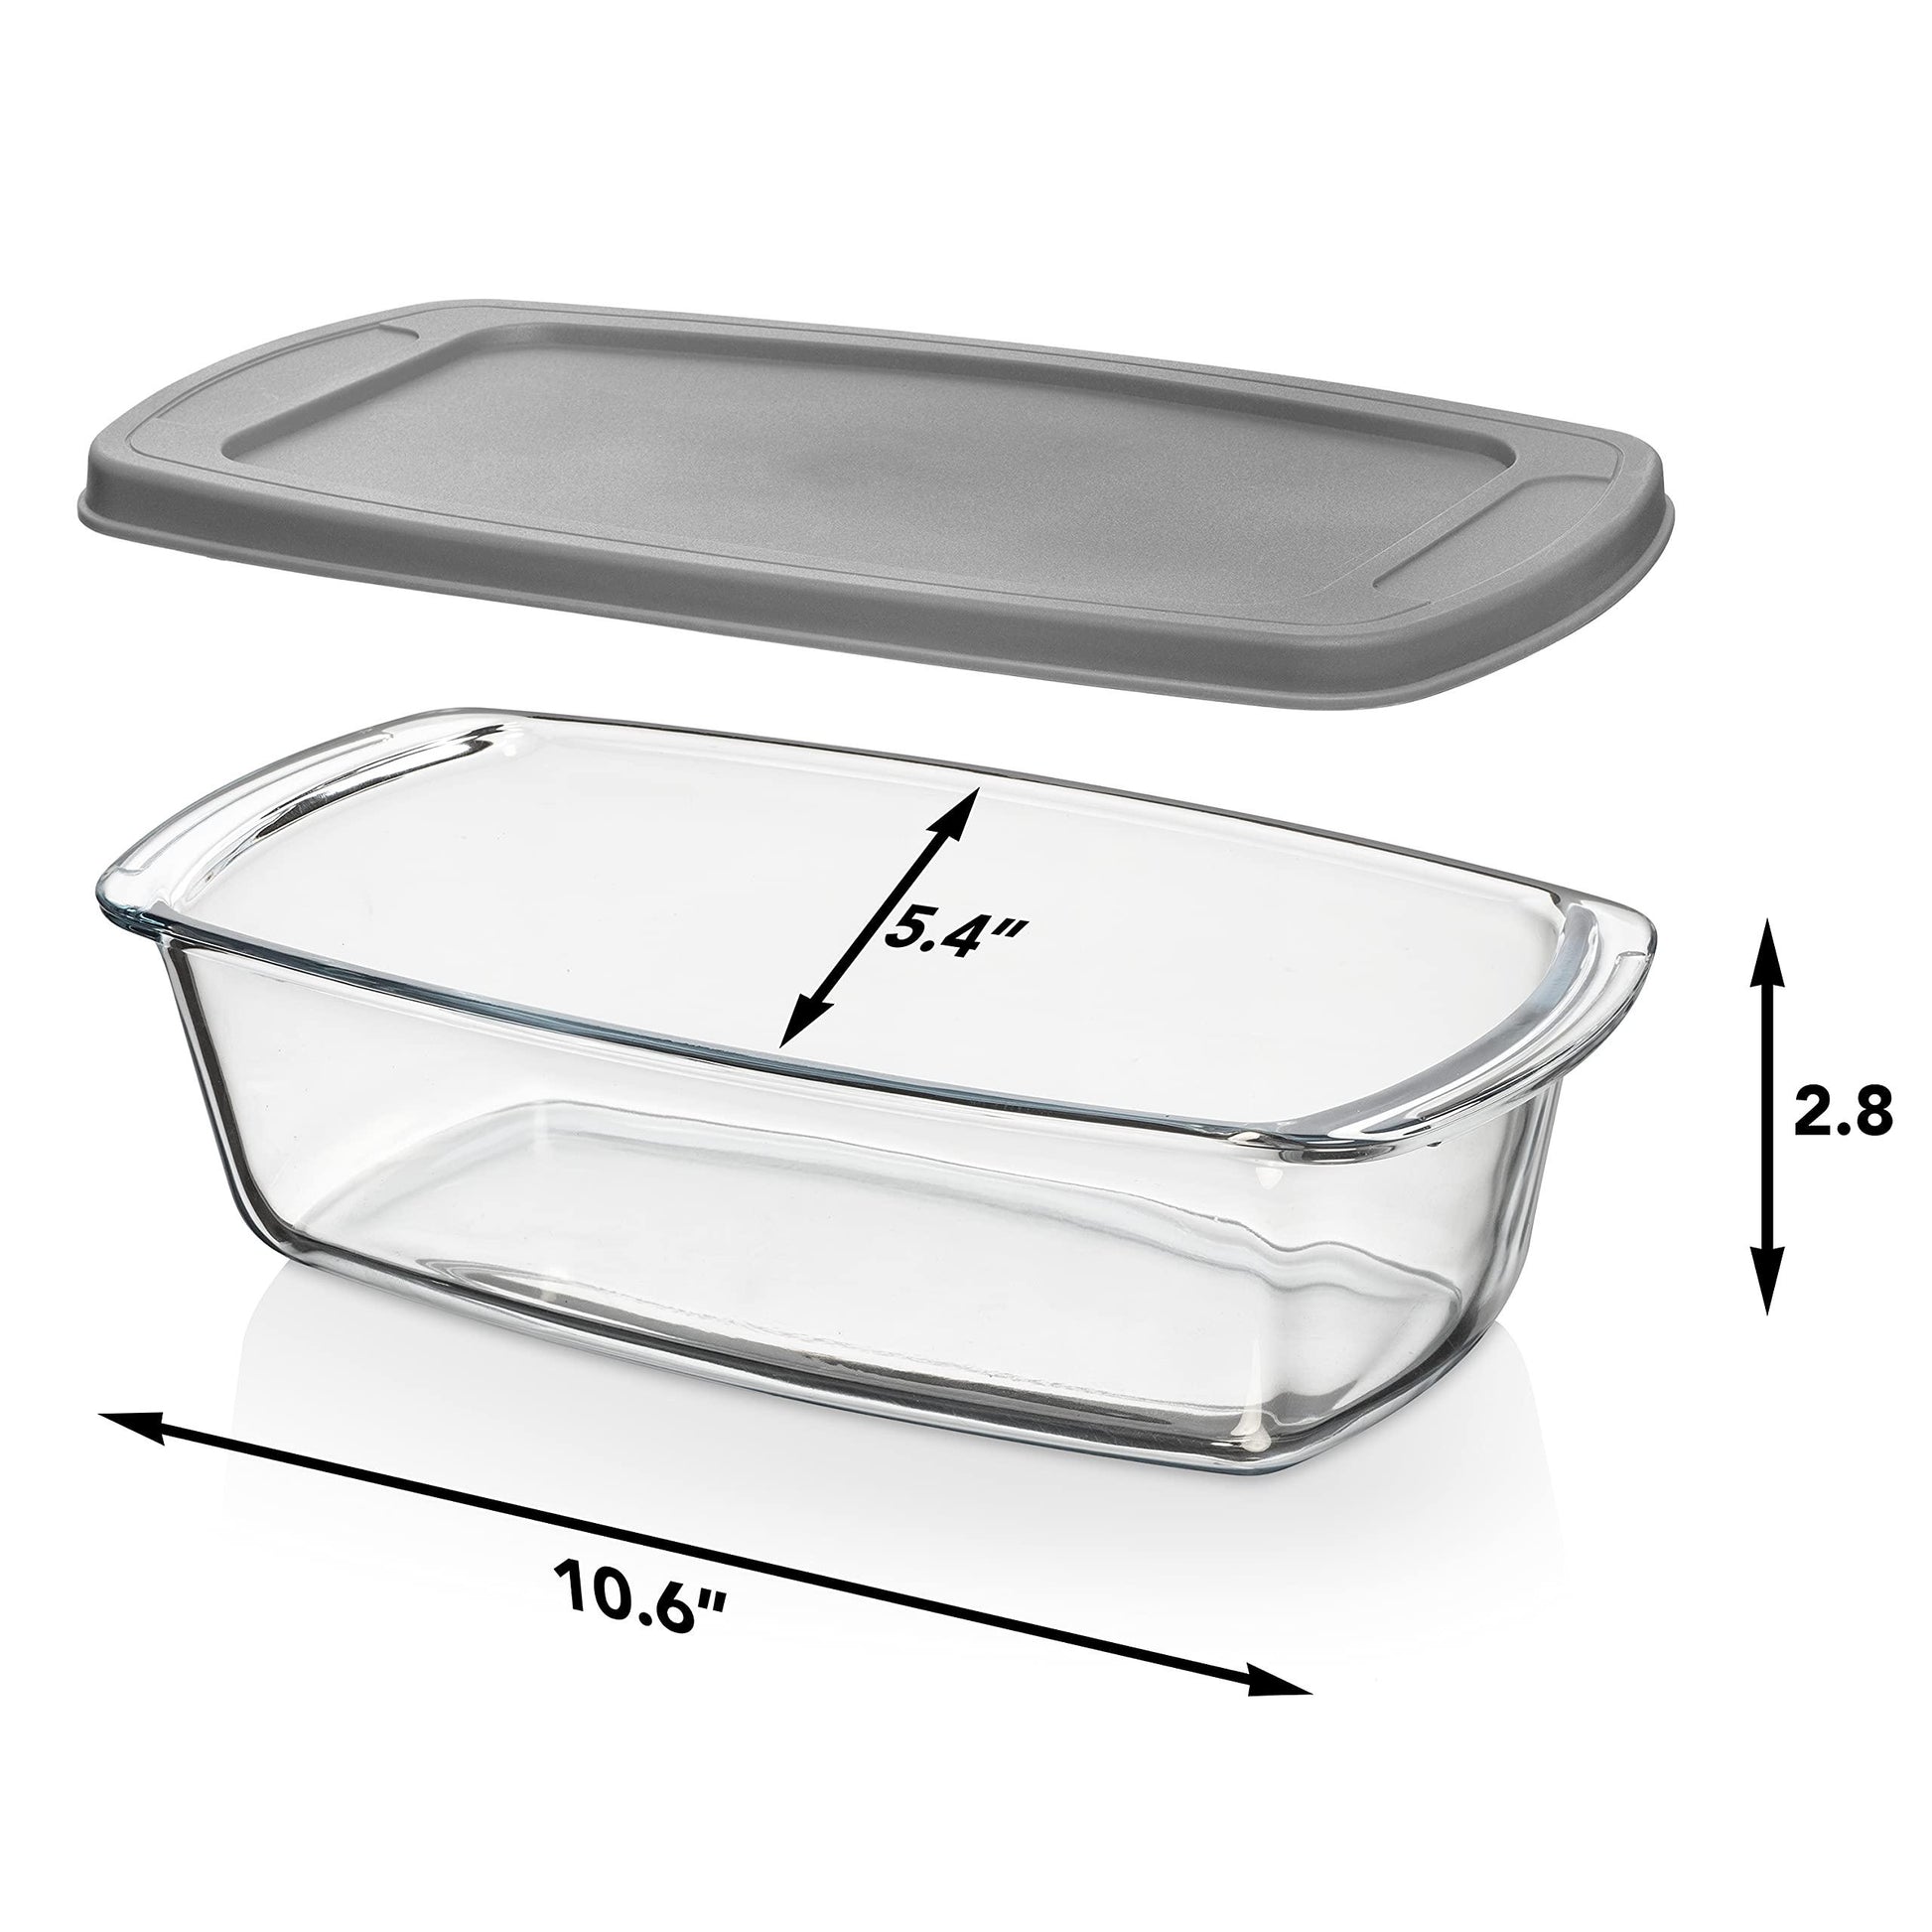 Razab LARGE 7.6 Cups/1800 ML/1.9 Qt Glass Loaf Pan with Lids (Set of 2) - Meatloaf Pan BPA free Airtight Lids Grip Handle Easy Carry, Microwave and Oven Safe - Loaf Pans For Baking Bread, Cakes - CookCave